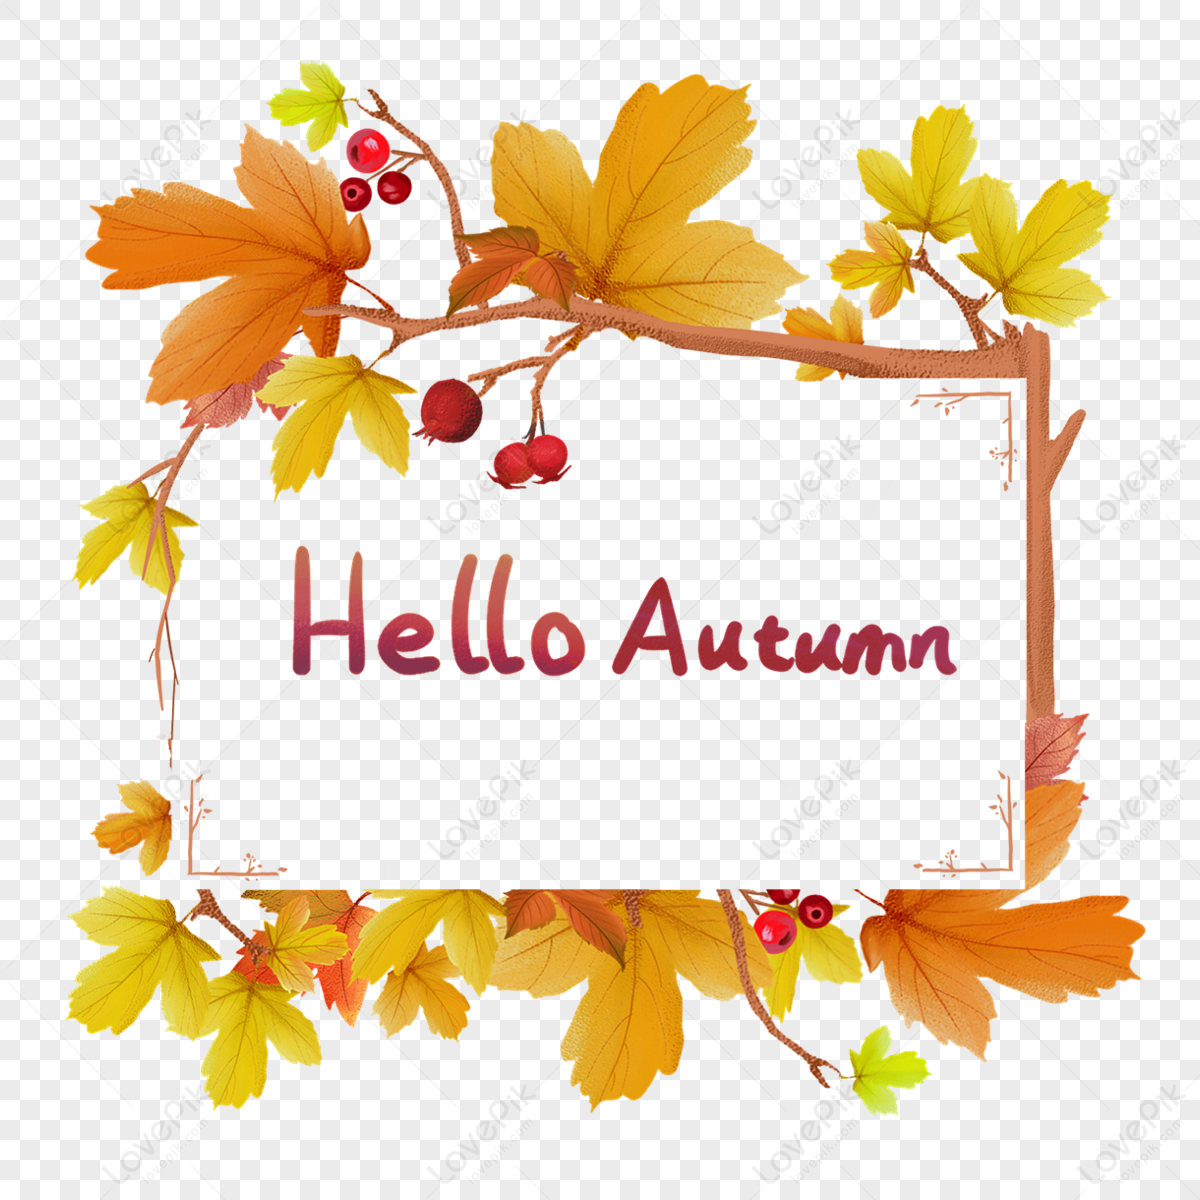 Hello Fall PNG Transparent Images Free Download